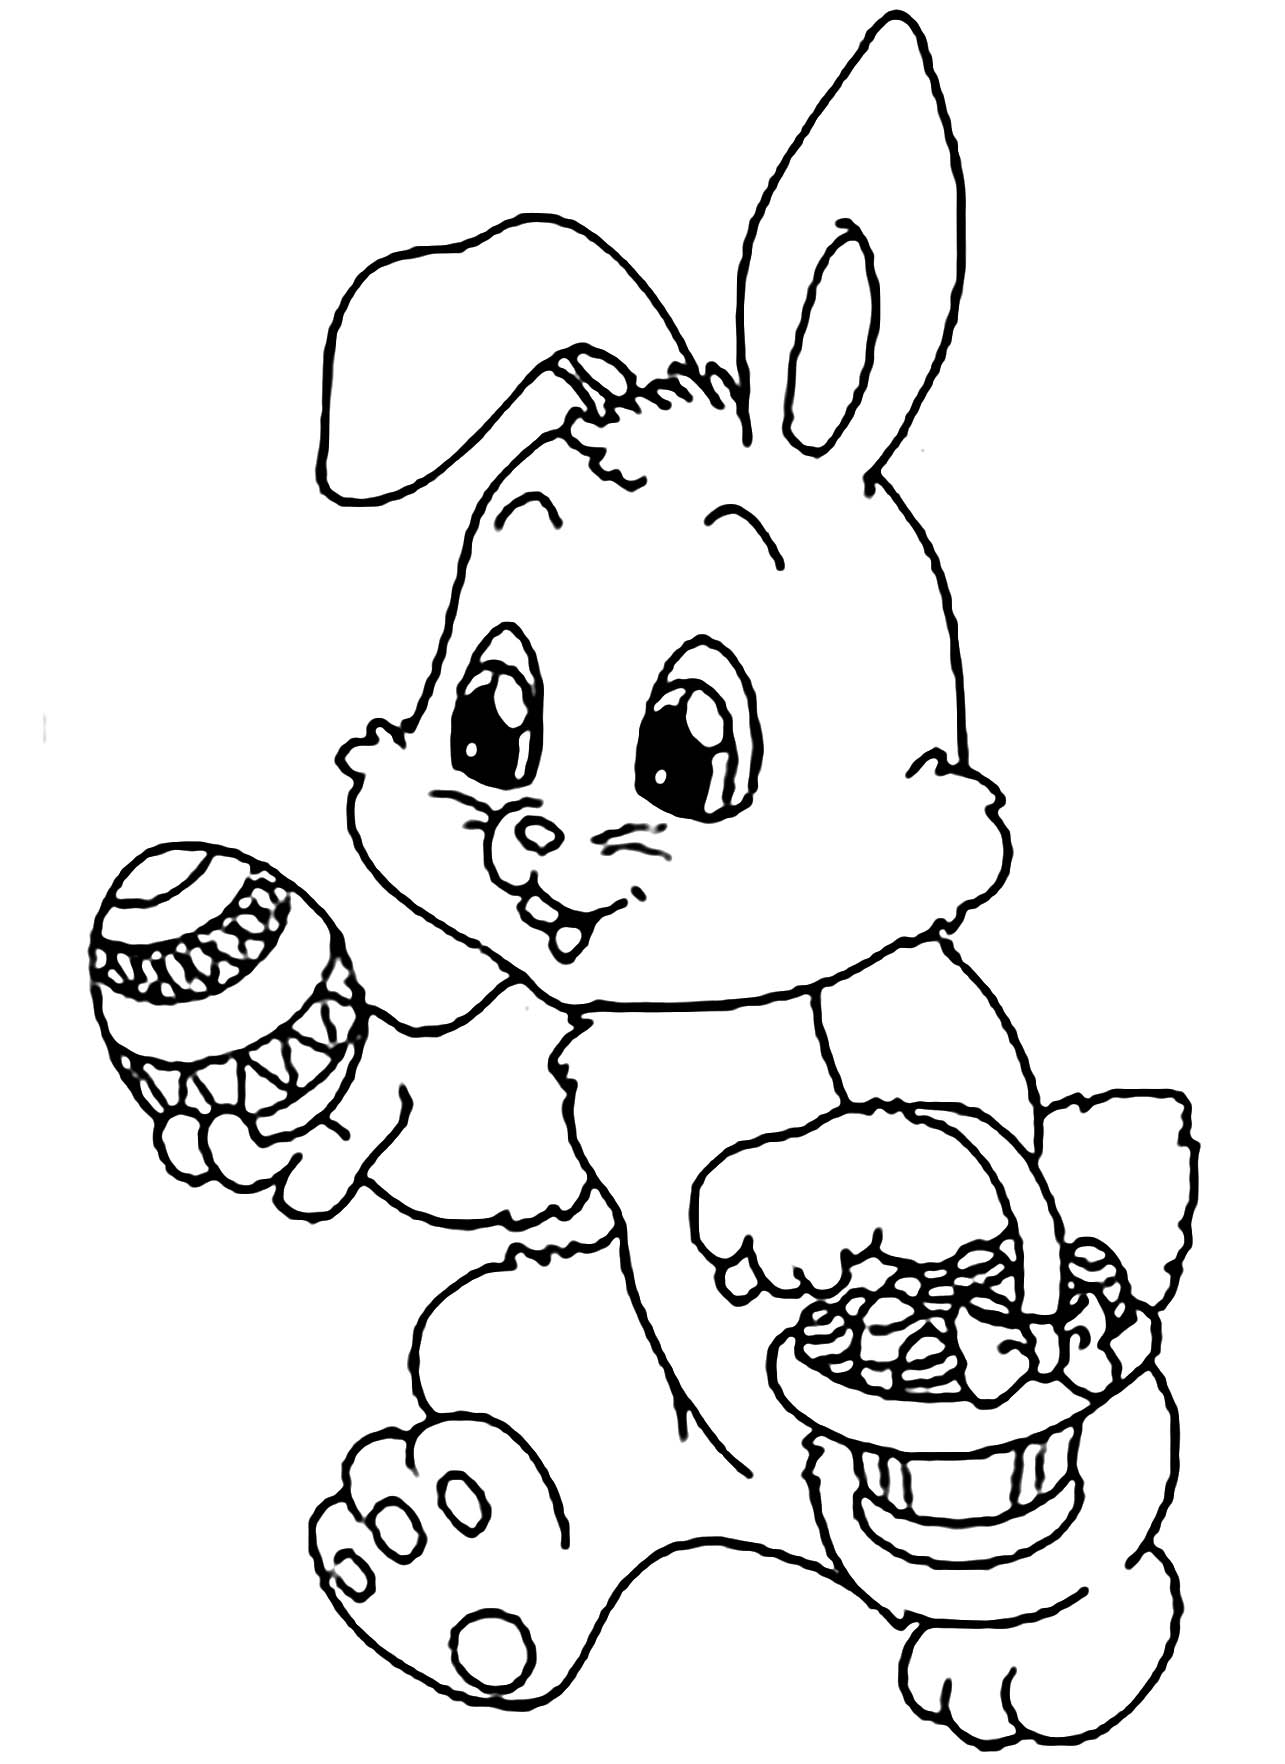 Rabbit free to color for children Rabbit Kids Coloring Pages